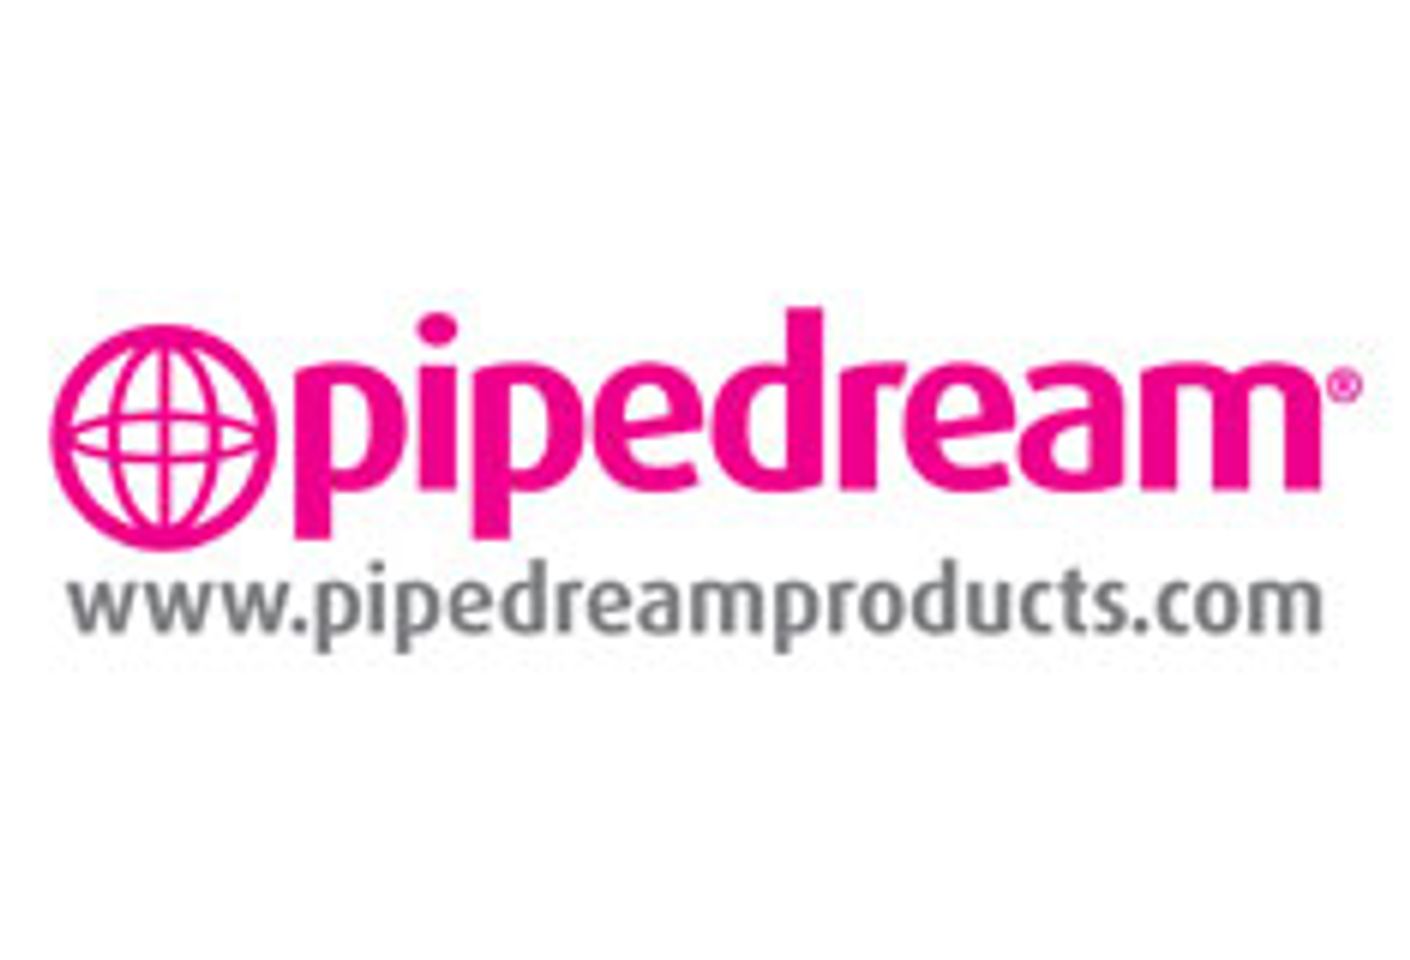 Pipedream's 2014 Awards Nods Pile Up With 5 AVN Awards Noms